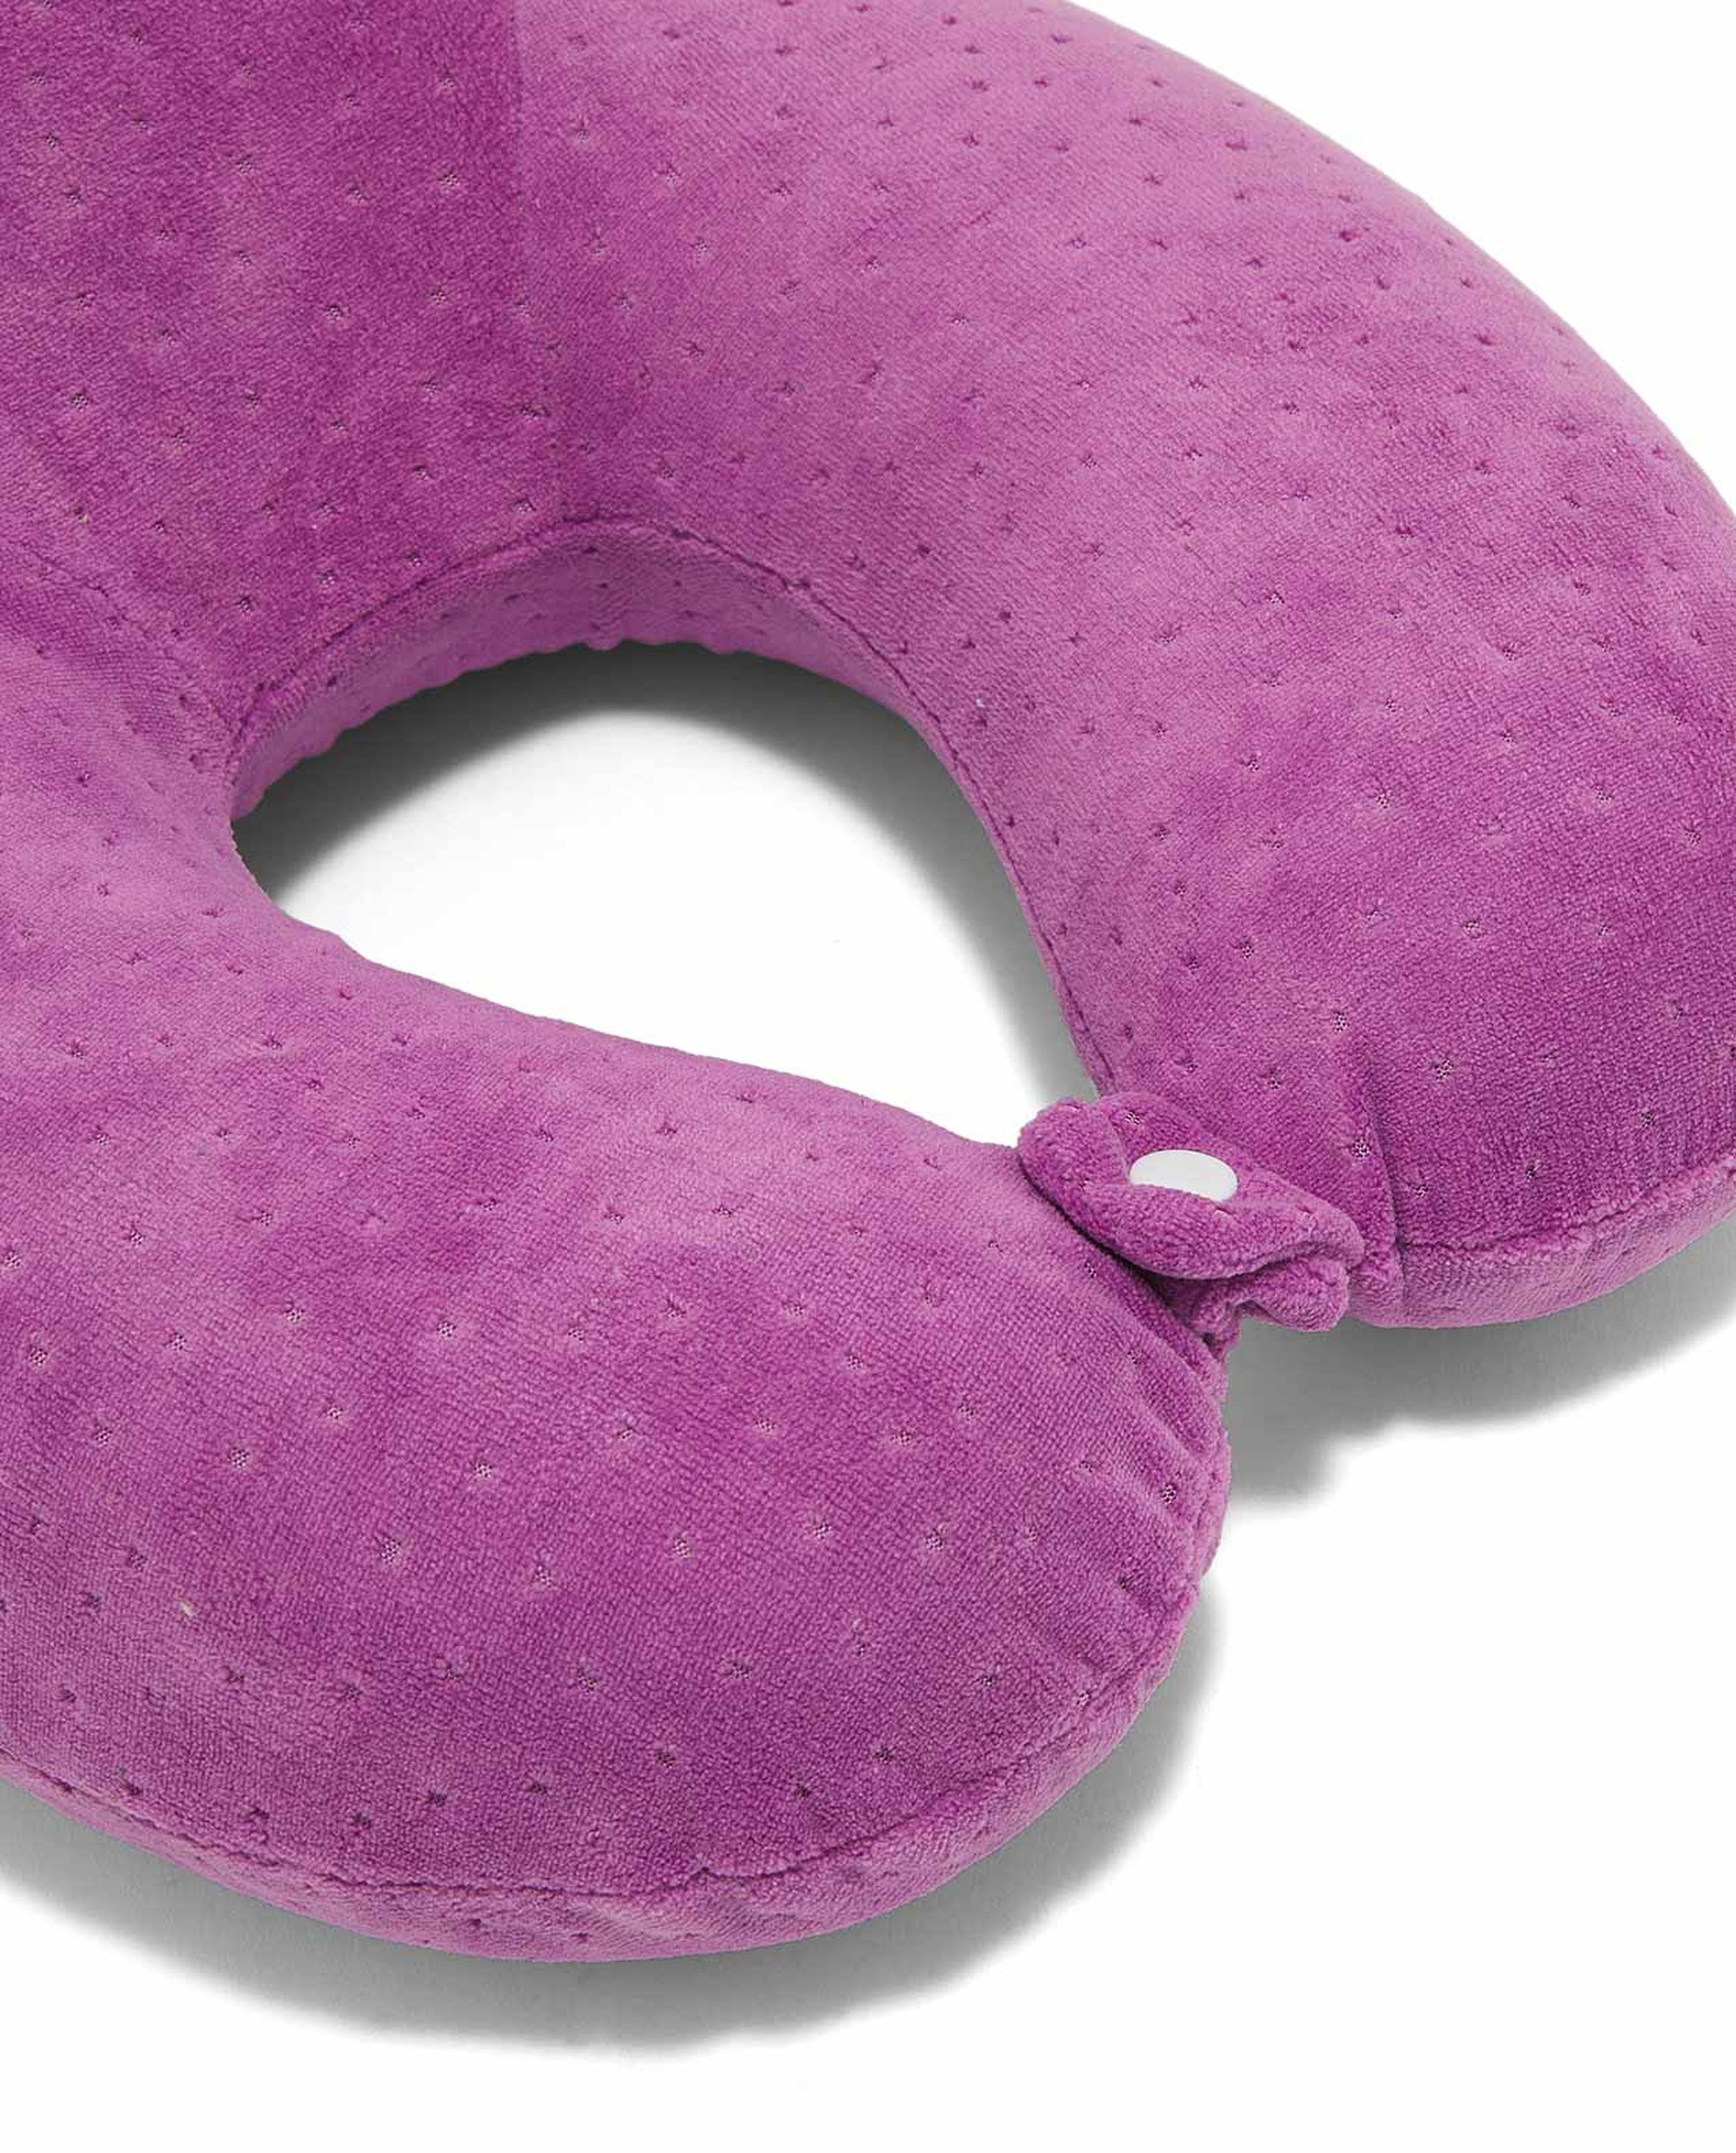 Solid Travel Neck Pillow